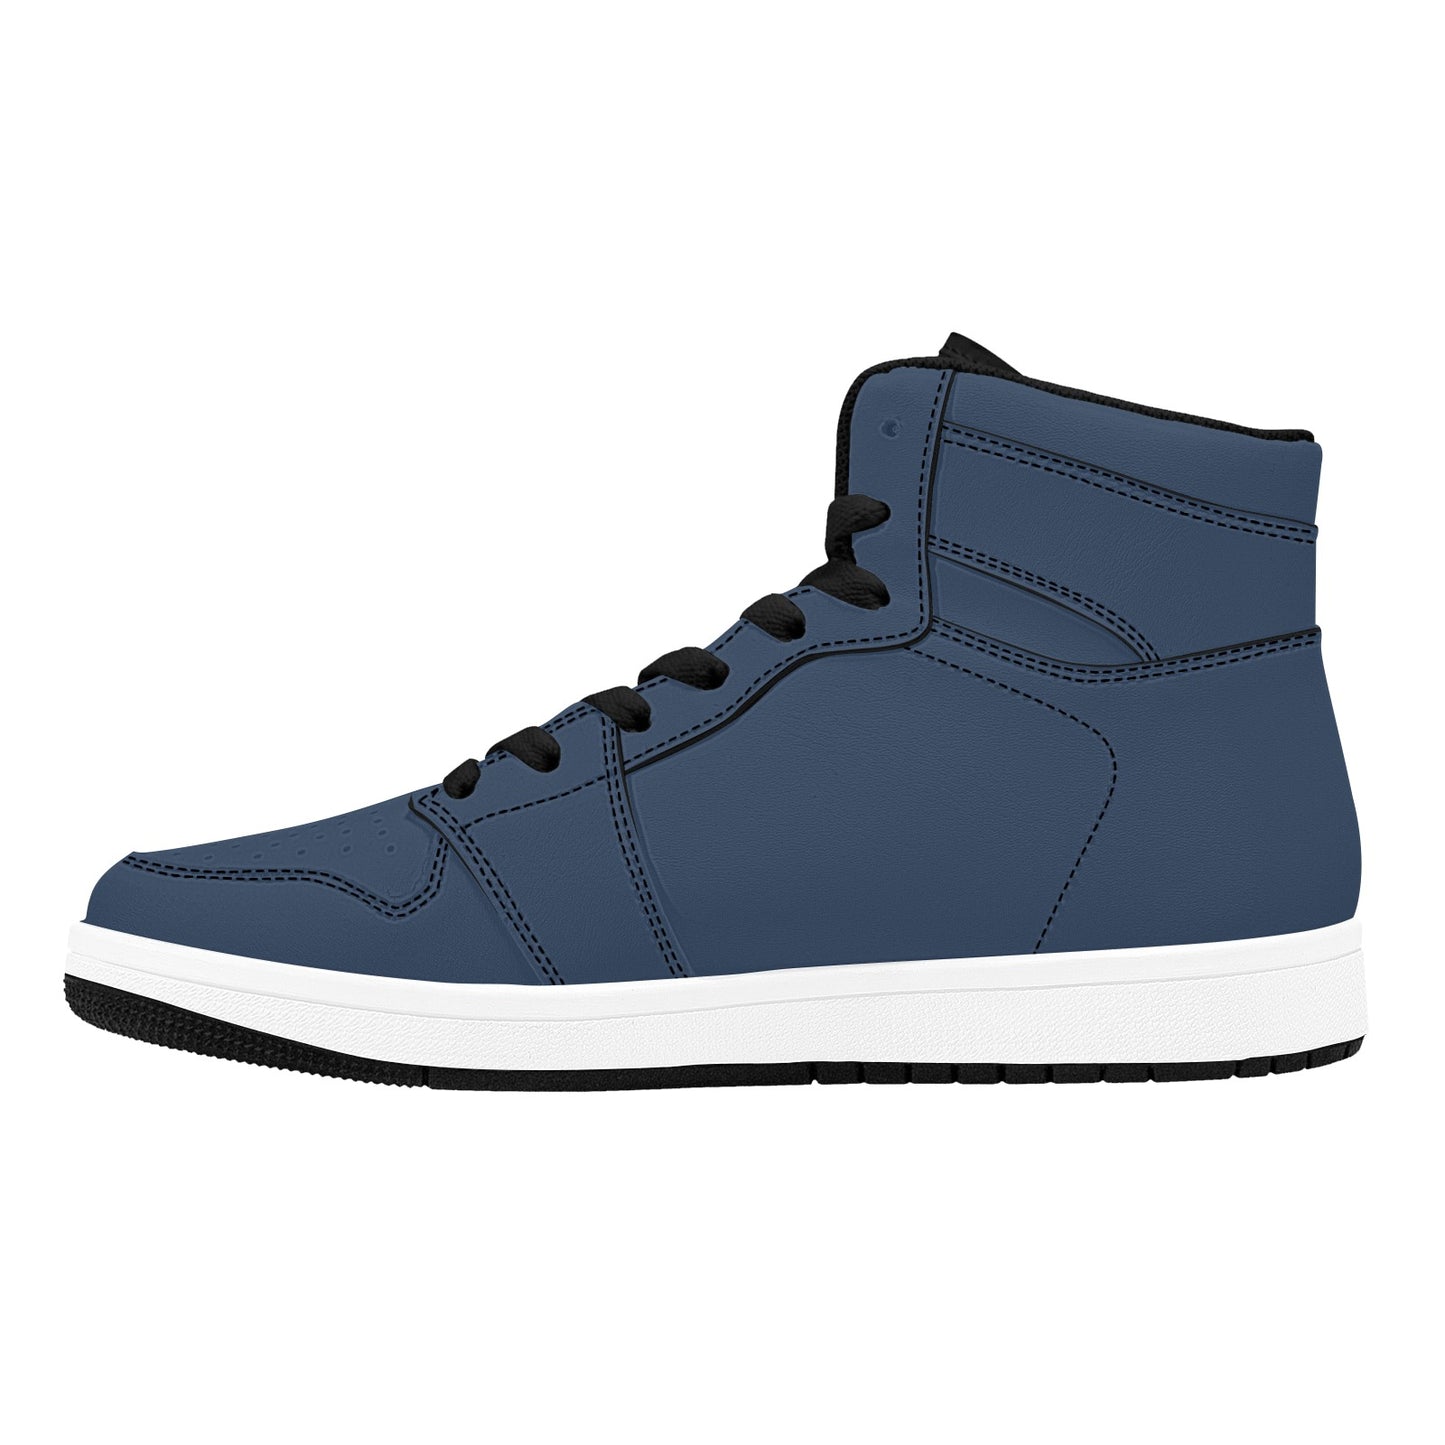 Blue High Top Sneakers Anime Inspired High Top Sneakers Men's High Top Sneakers